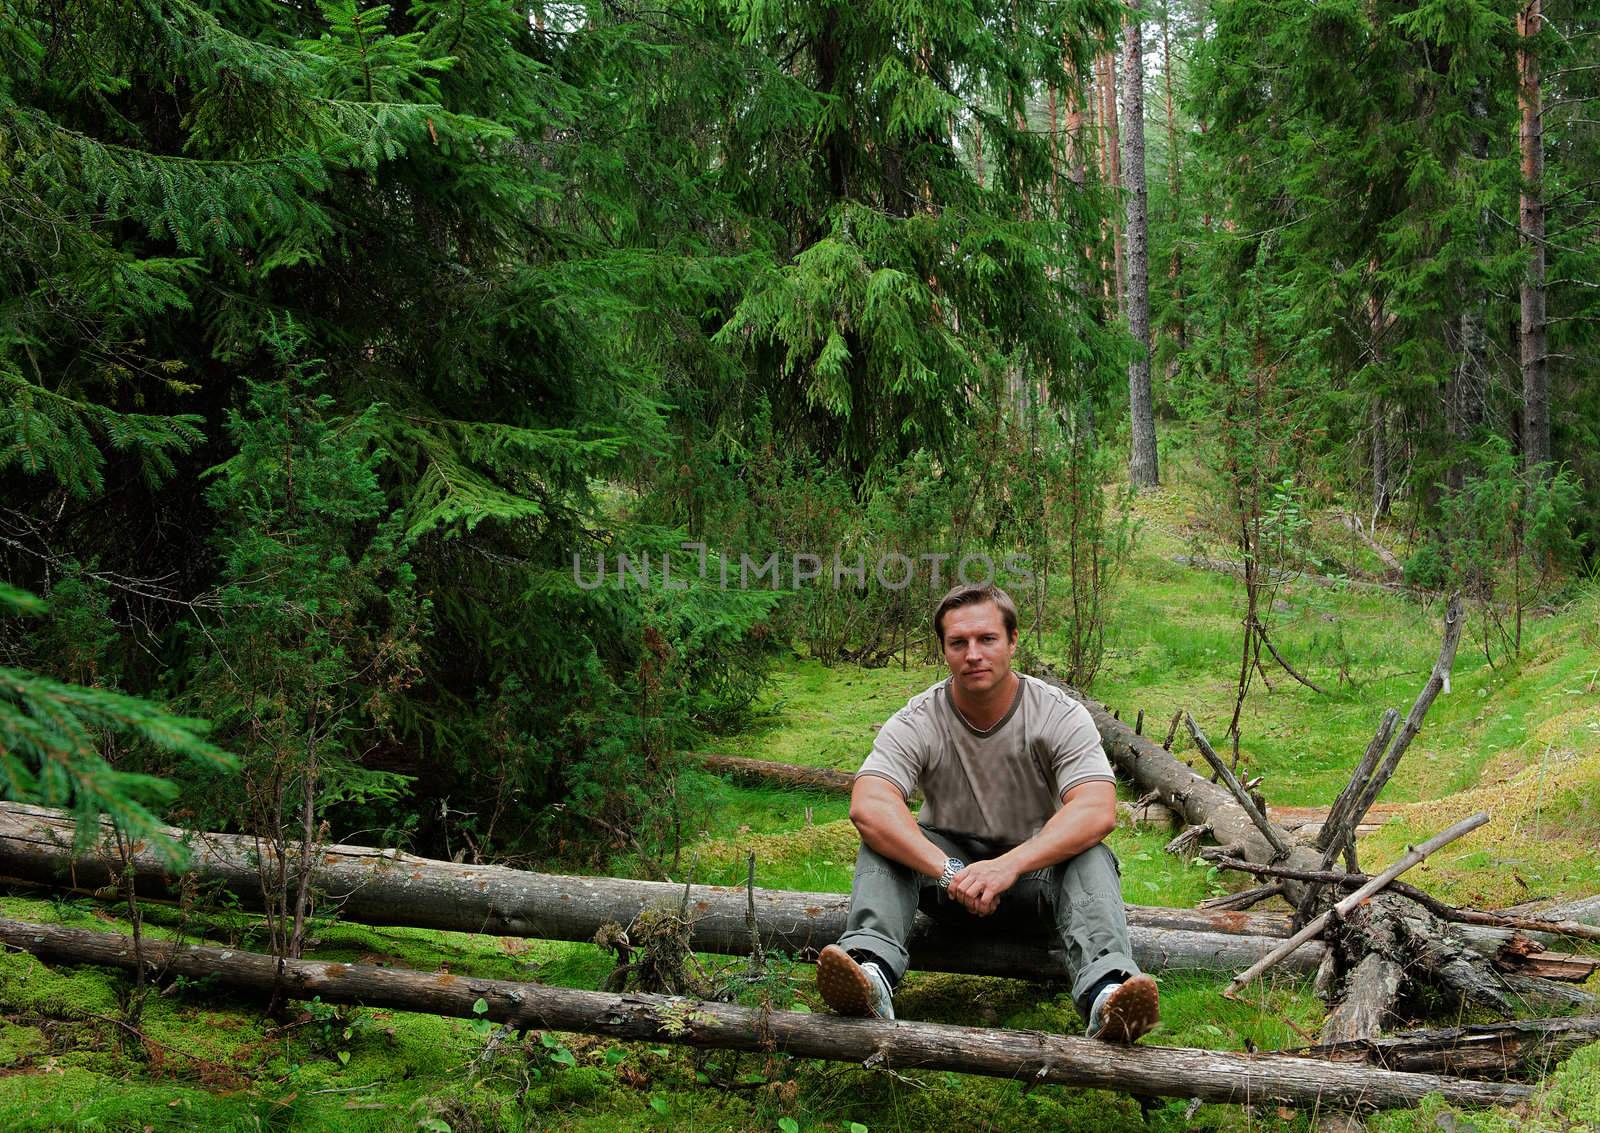 The man in  forest sits on a log